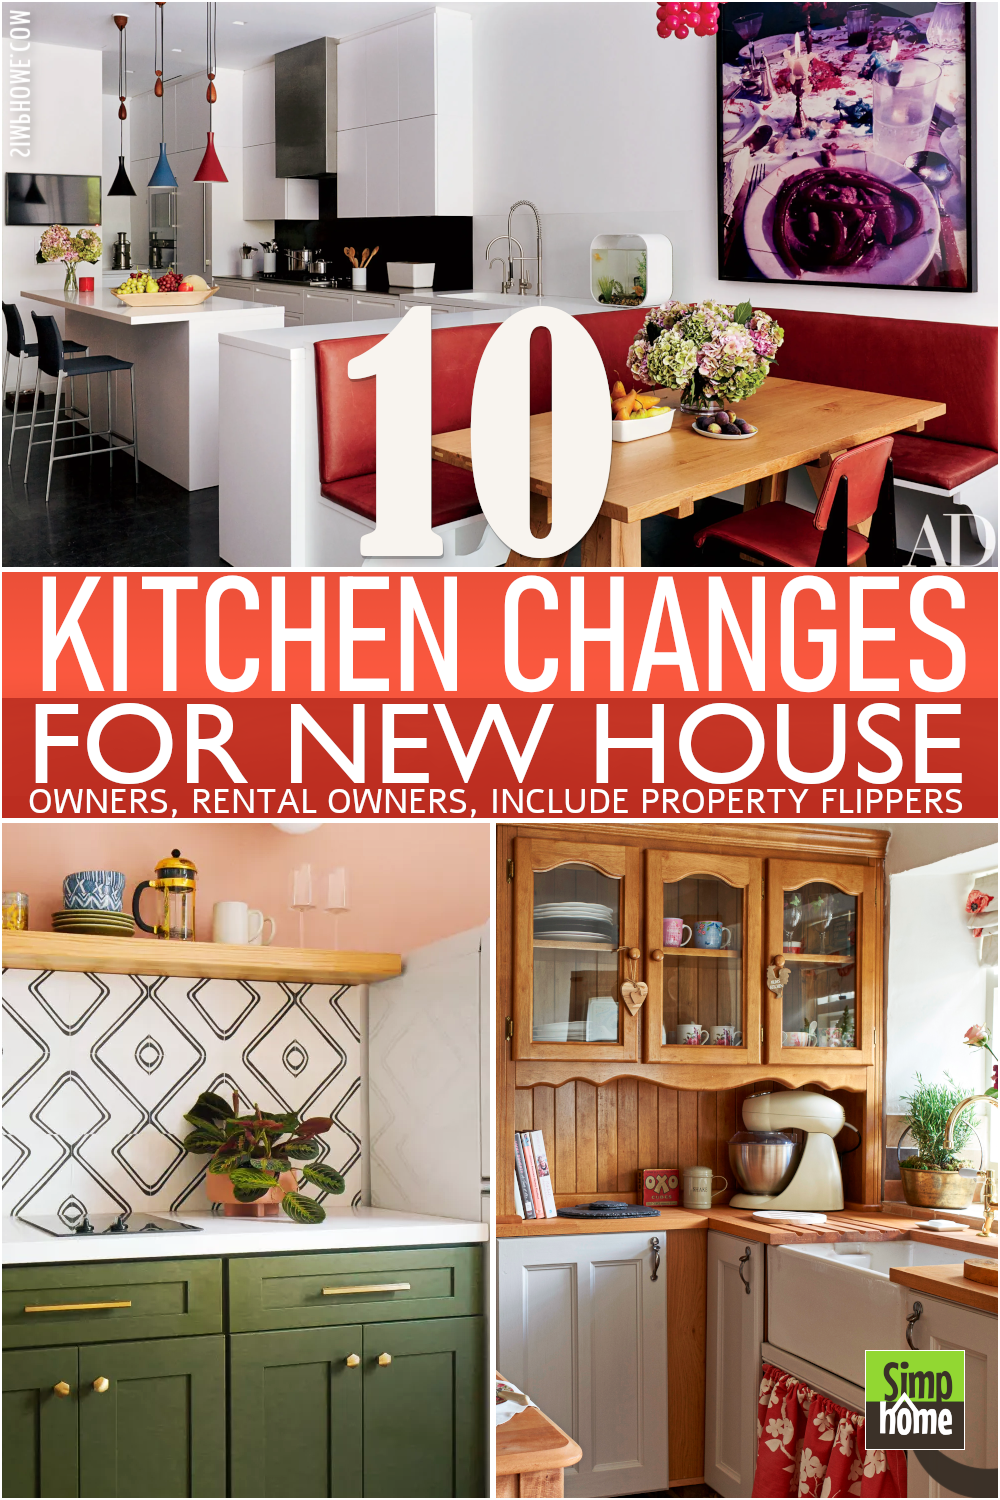 10 New Home Kitchen ideas image poster